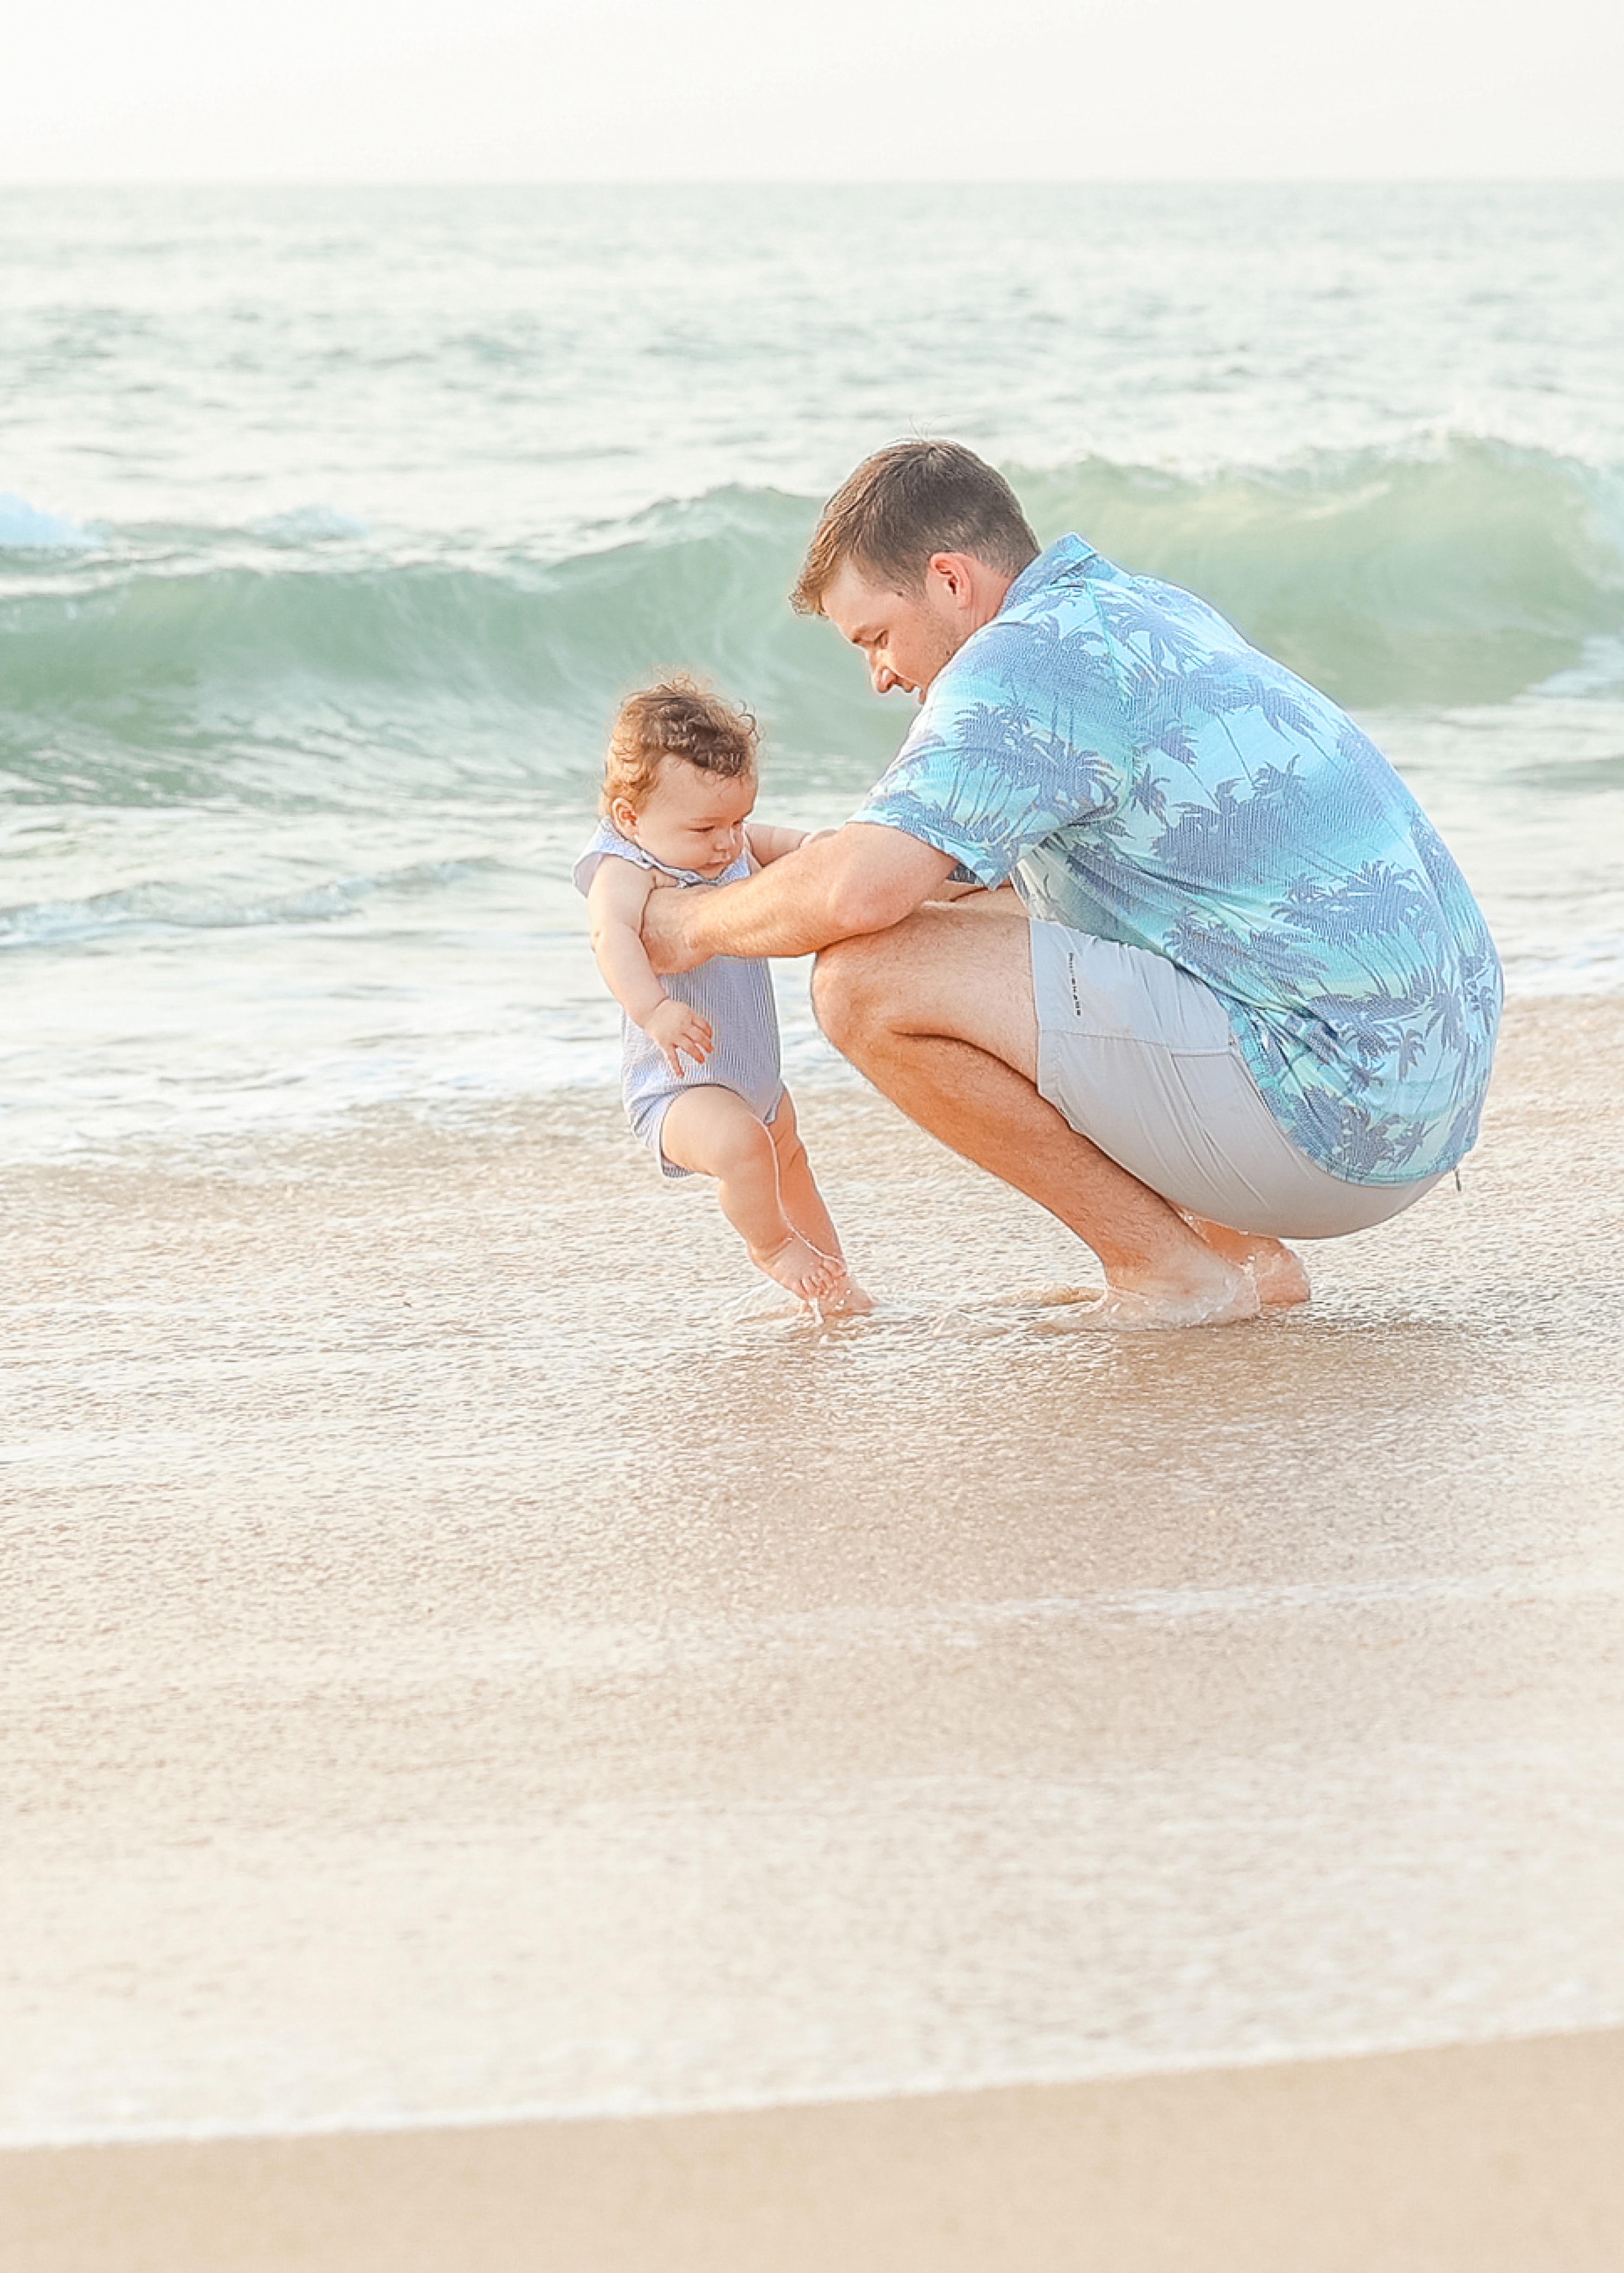 light and airy beach portrait of a father and baby at the beach